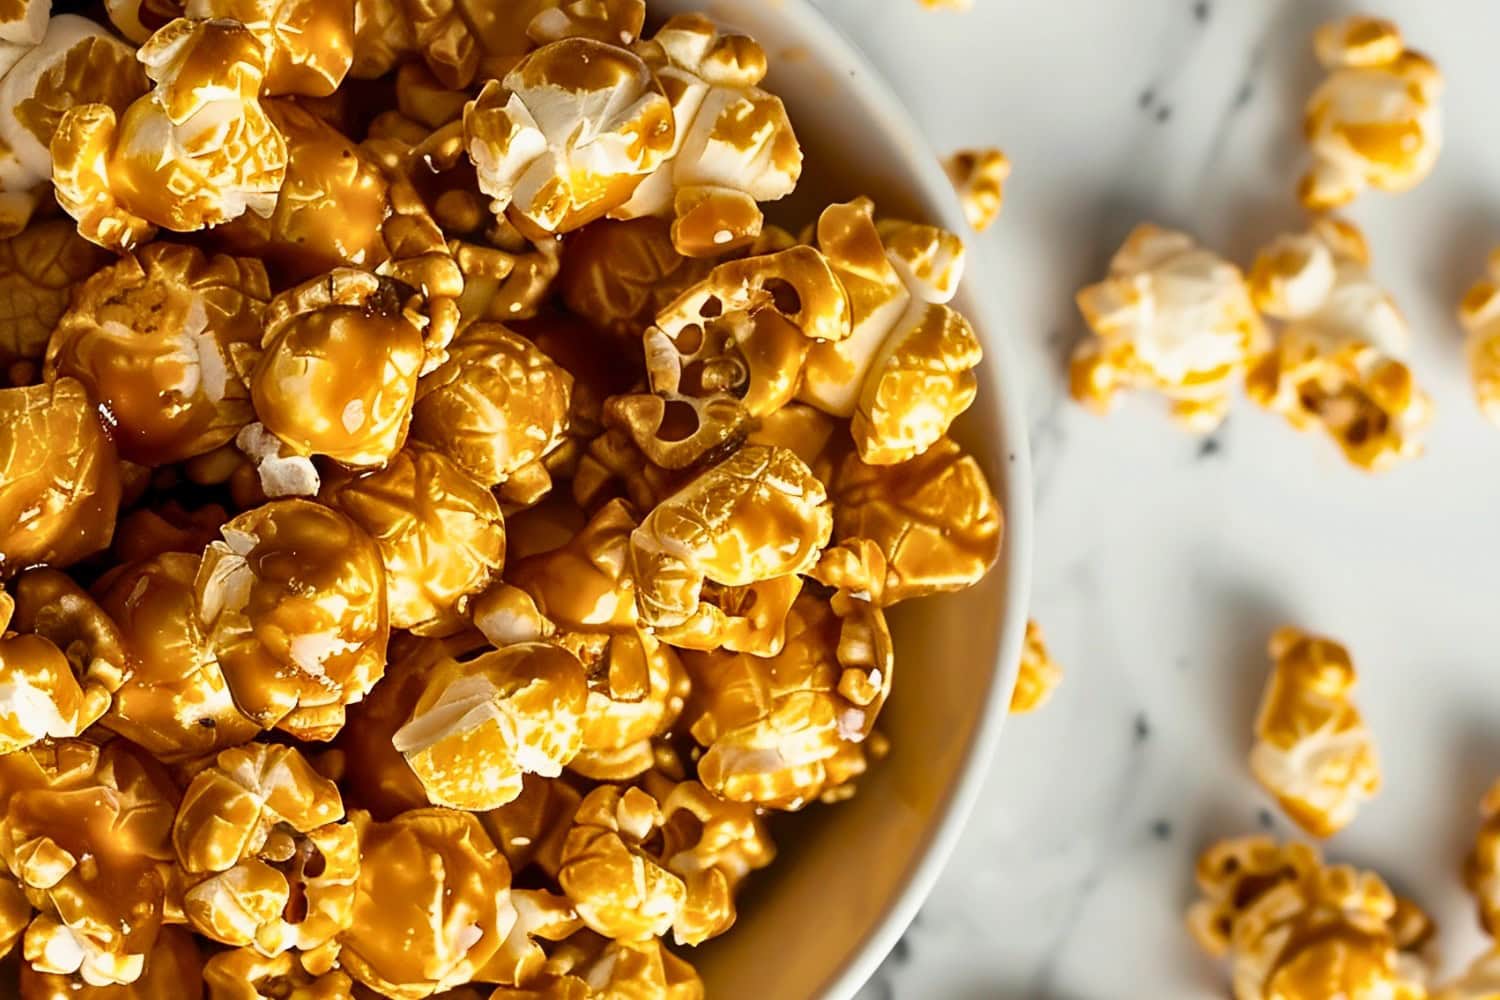 Microwave Caramel Popcorn in a Bowl on a White Marble Table with More Popcorn on the Table